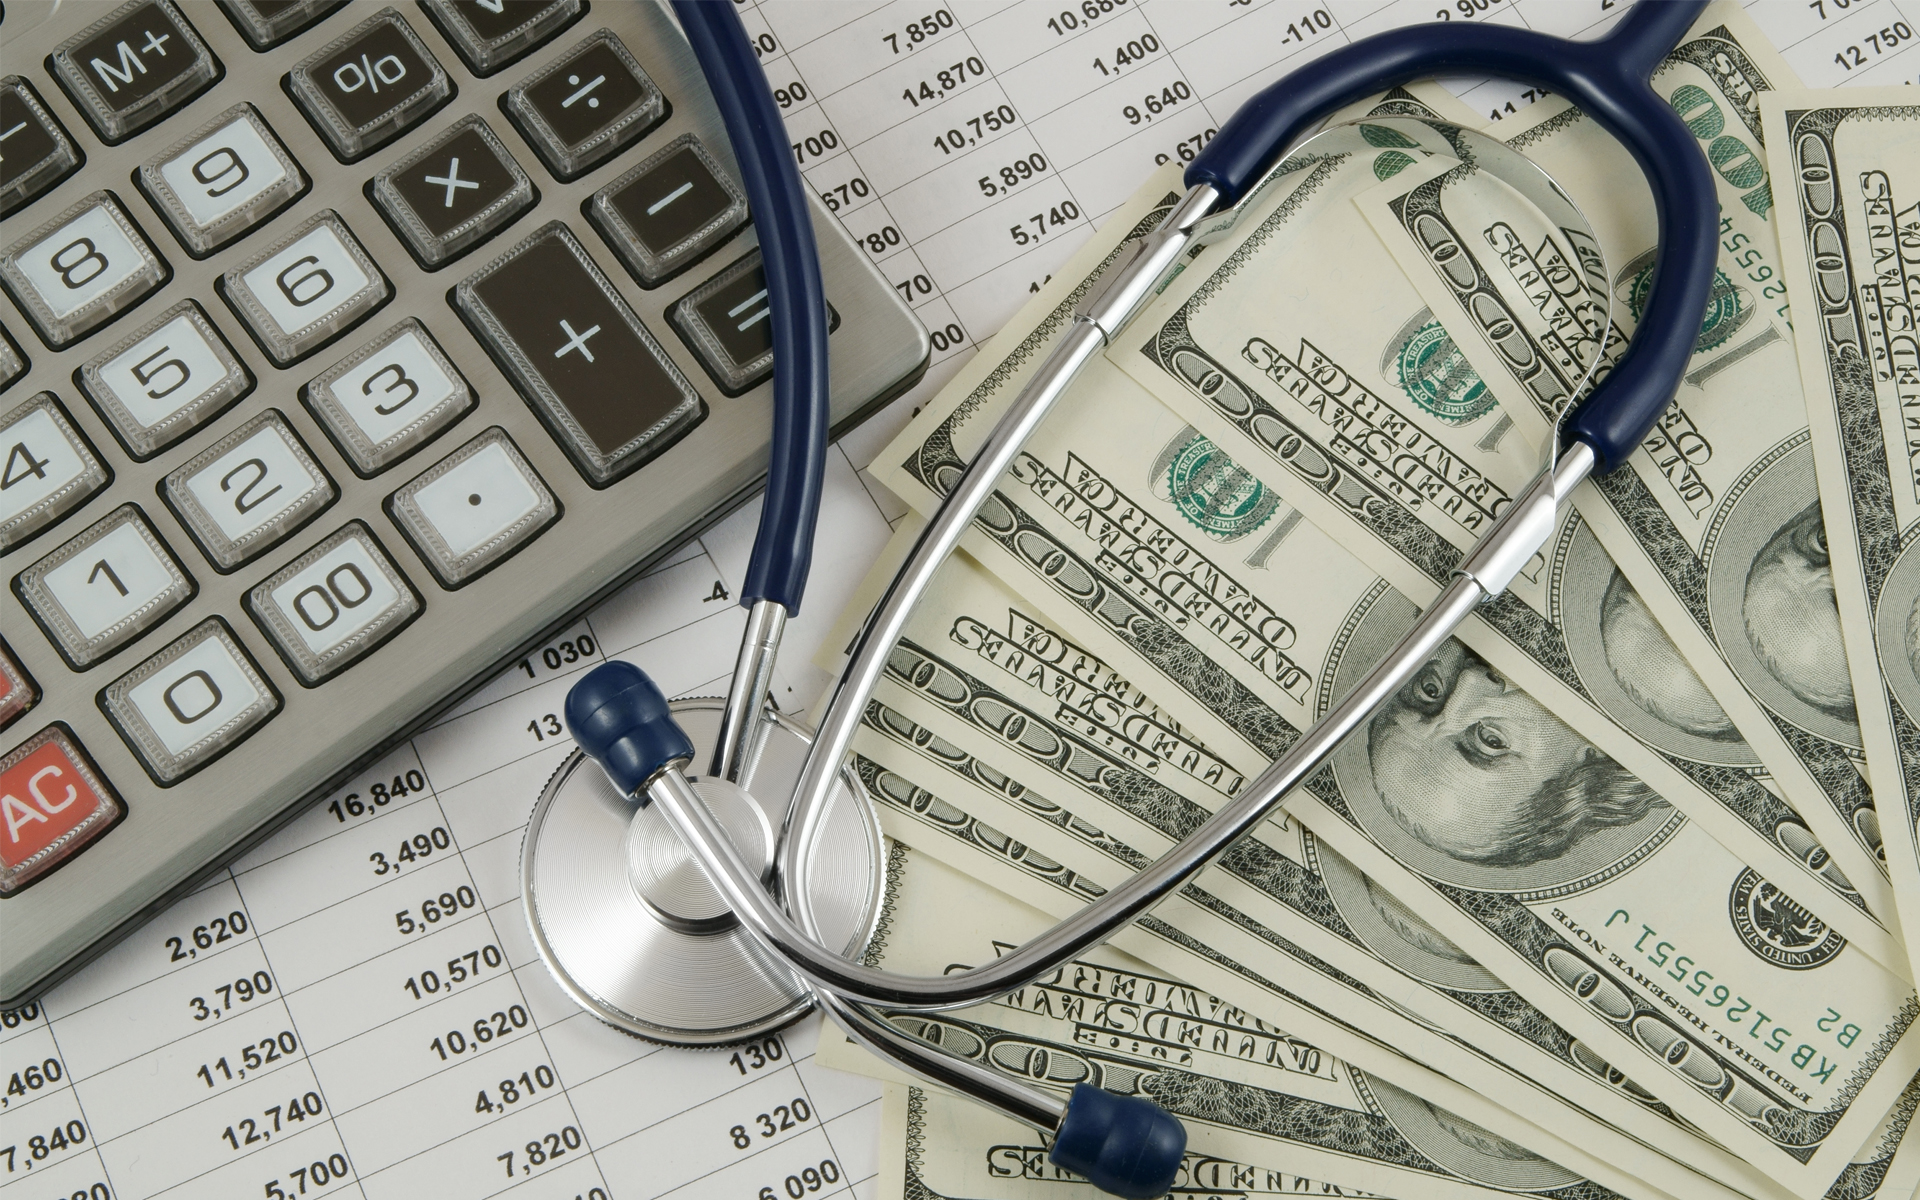 The High Price of Health Insurance How to Find Affordable Coverage